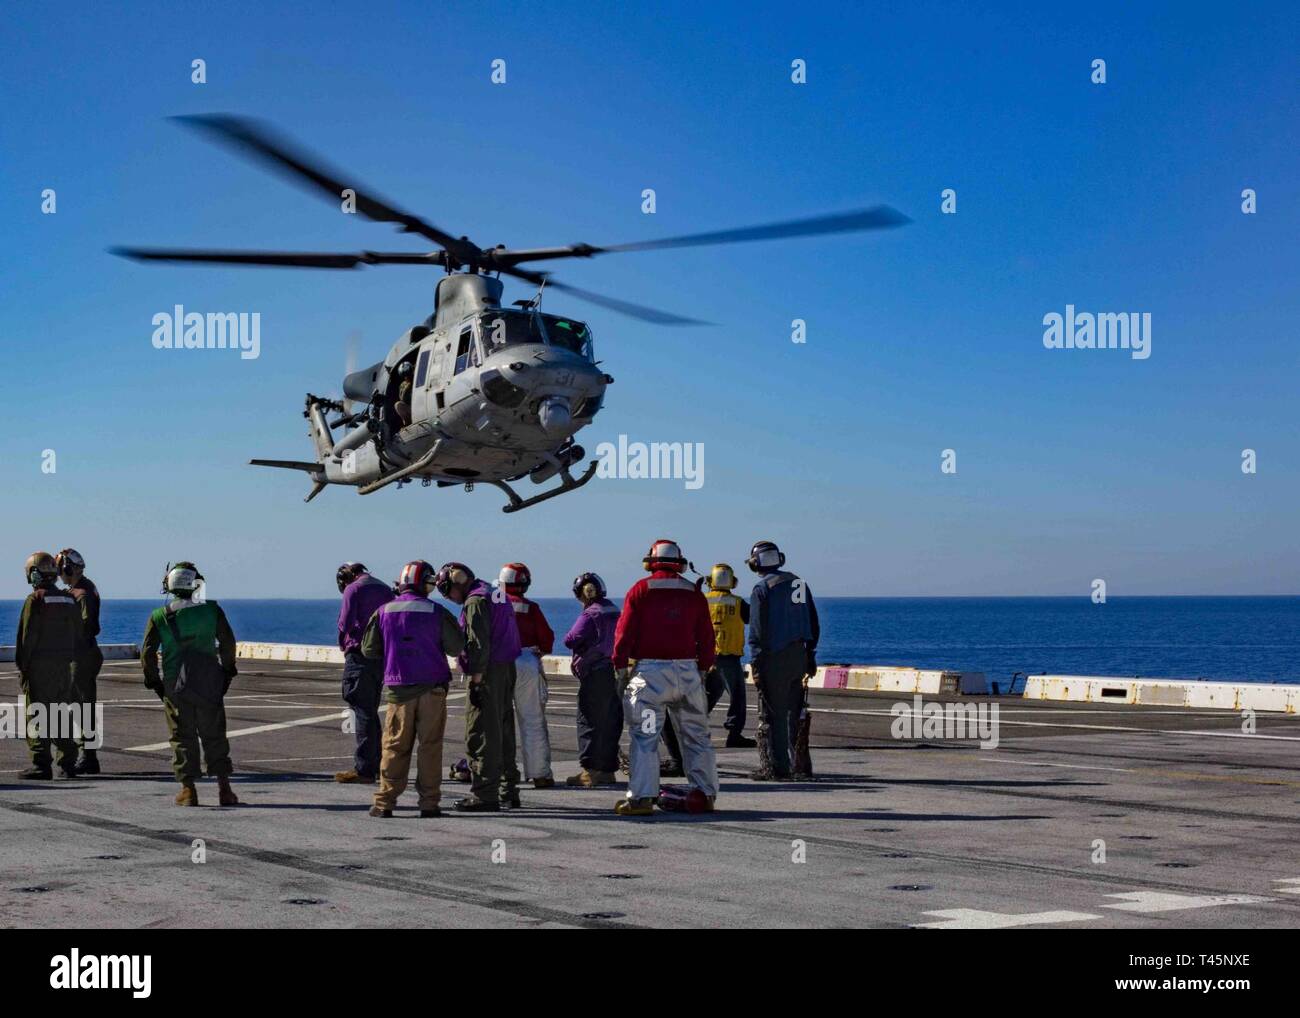 MEDITERRANEAN SEA (Mar. 5, 2019) A UH-1Y Huey helicopter assigned to the “Black Knights” of Marine Medium Tiltrotor Squadron (VMM) 264 (Reinforced) lands on the flight deck of the San Antonio-class amphibious transport dock ship USS Arlington (LPD 24), Mar. 5, 2019. Arlington is on a scheduled deployment as part of the Kearsarge Amphibious Ready Group in support of maritime security operations, crisis response and theater security cooperation, while also providing a forward naval presence. Stock Photo